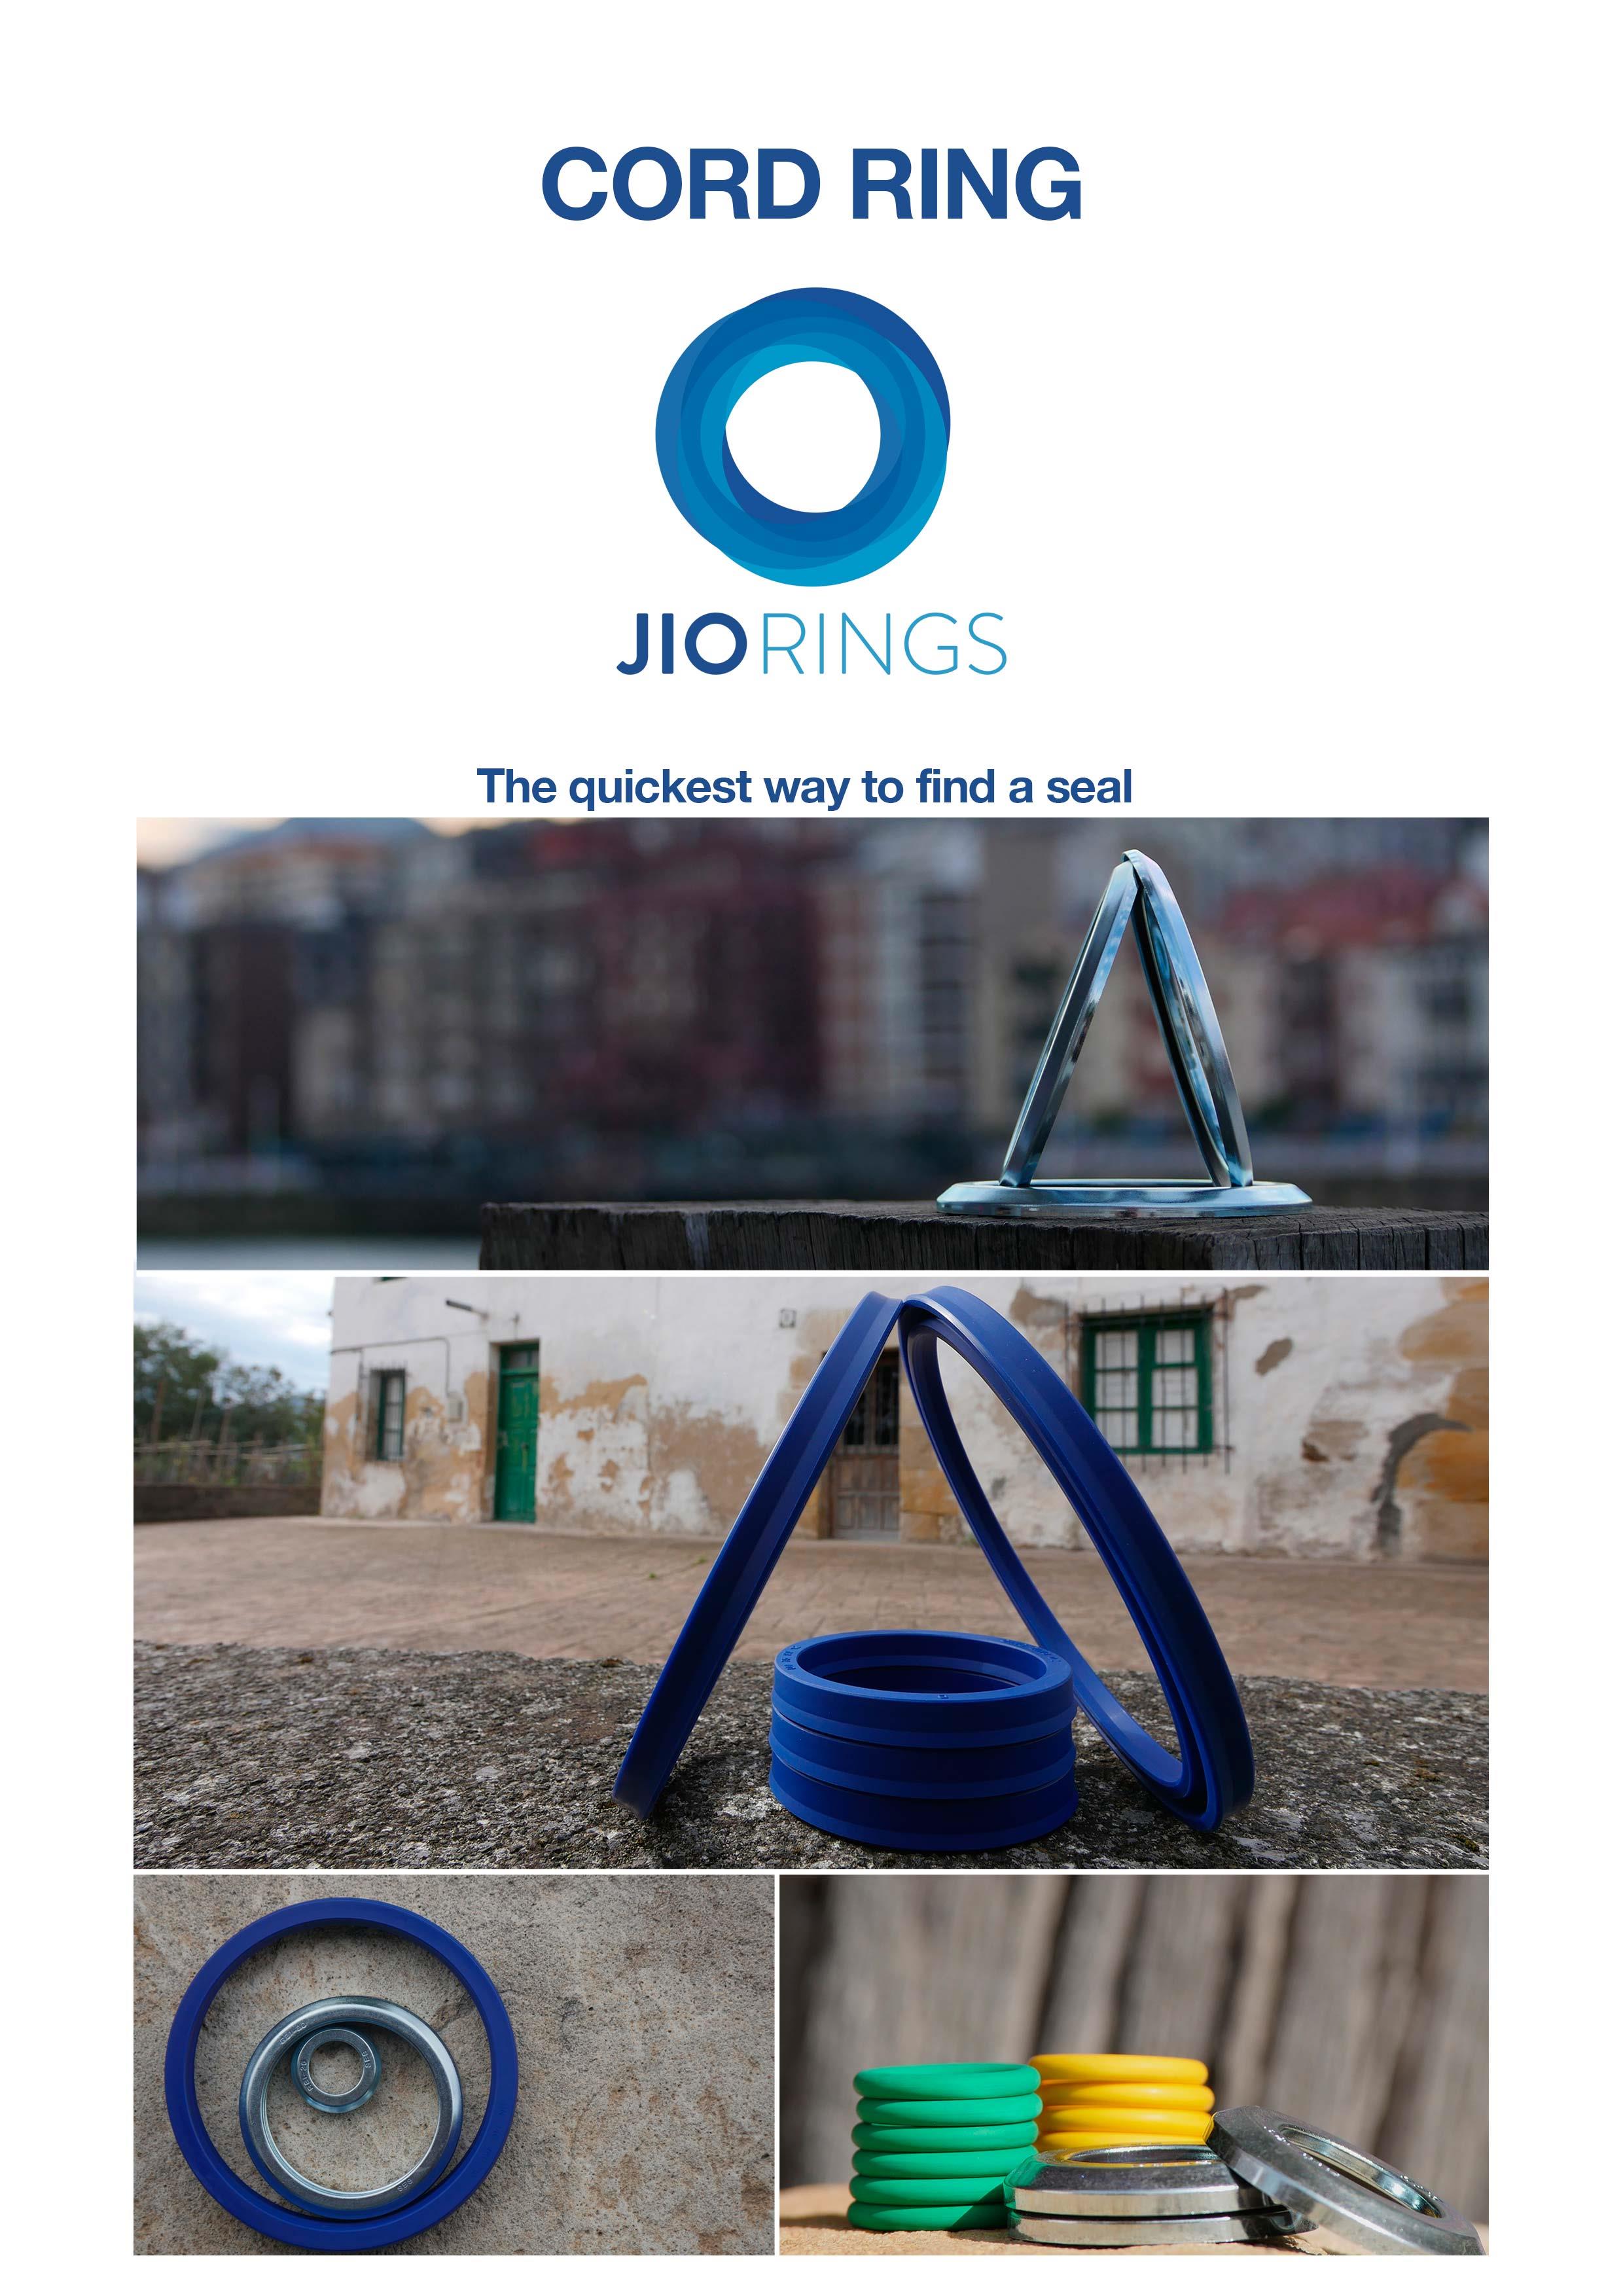 Now more and better cord-ring | News | JIOrings